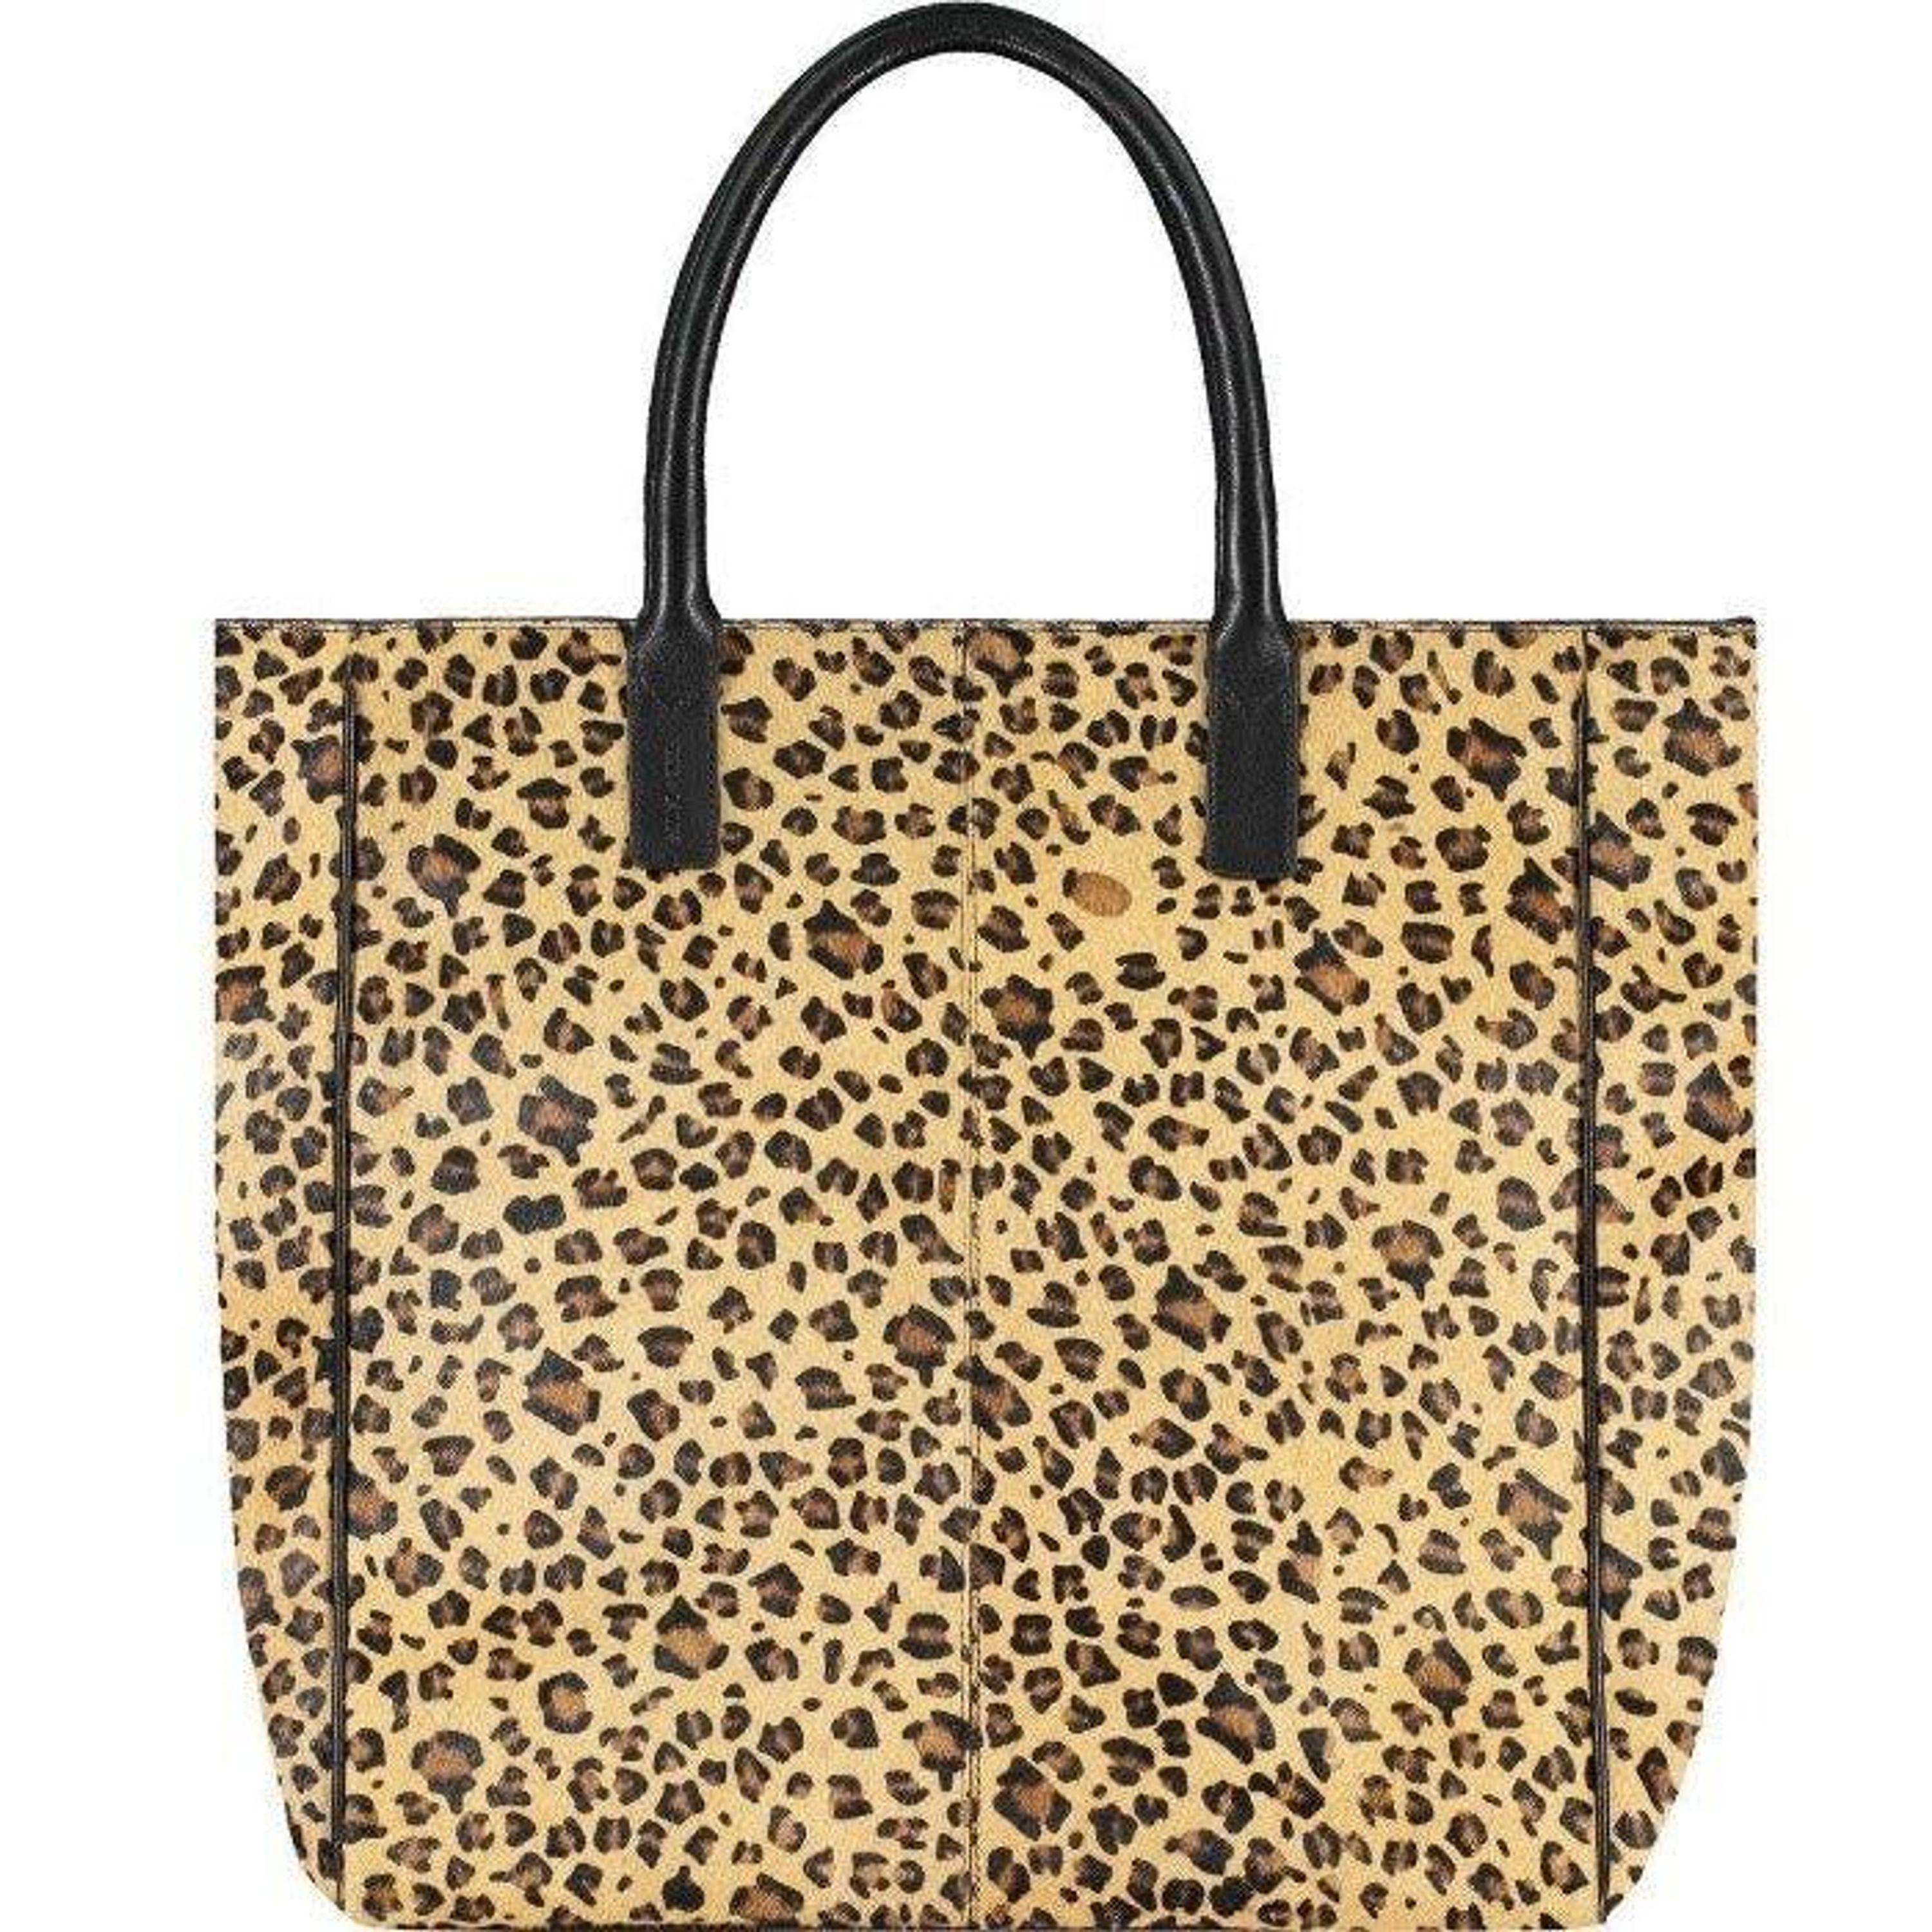 Brix + Bailey Brix + Bailey Leopard Print Calf Hair Large Leather Tote ...